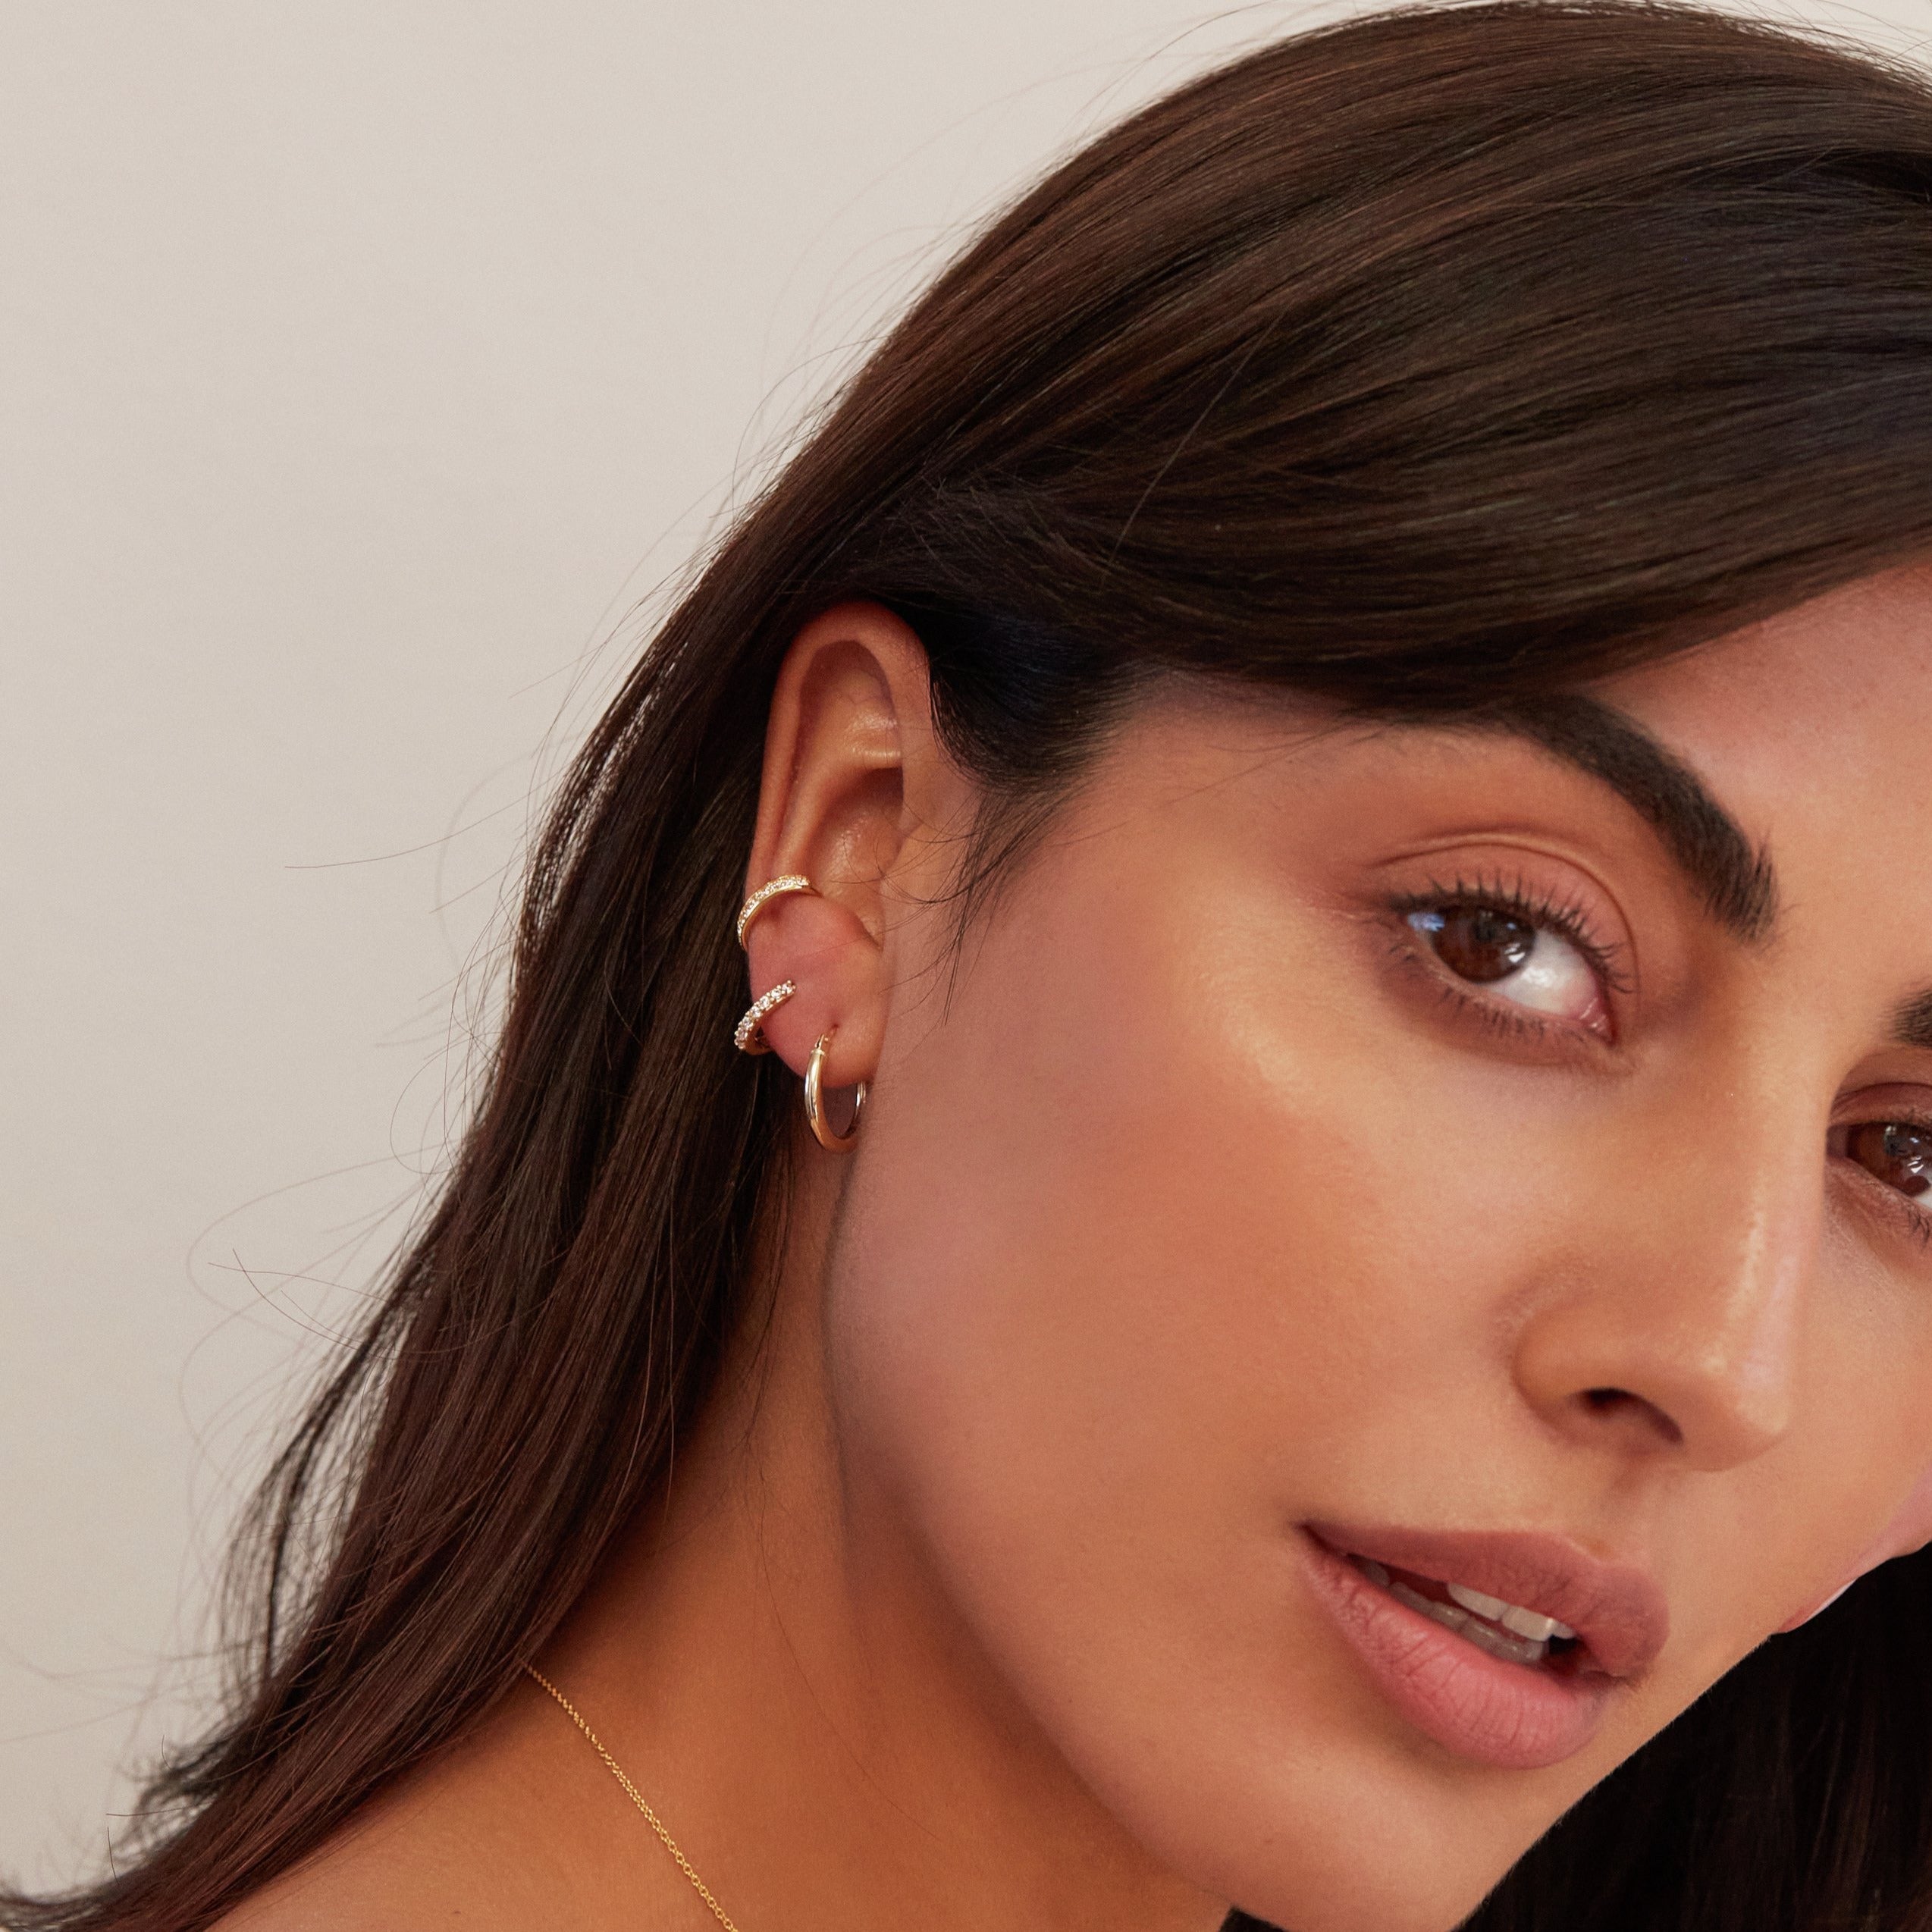 A brunette woman wearing two gold thick diamond style ear cuffs and a gold huggie hoop earring in her ear lobe